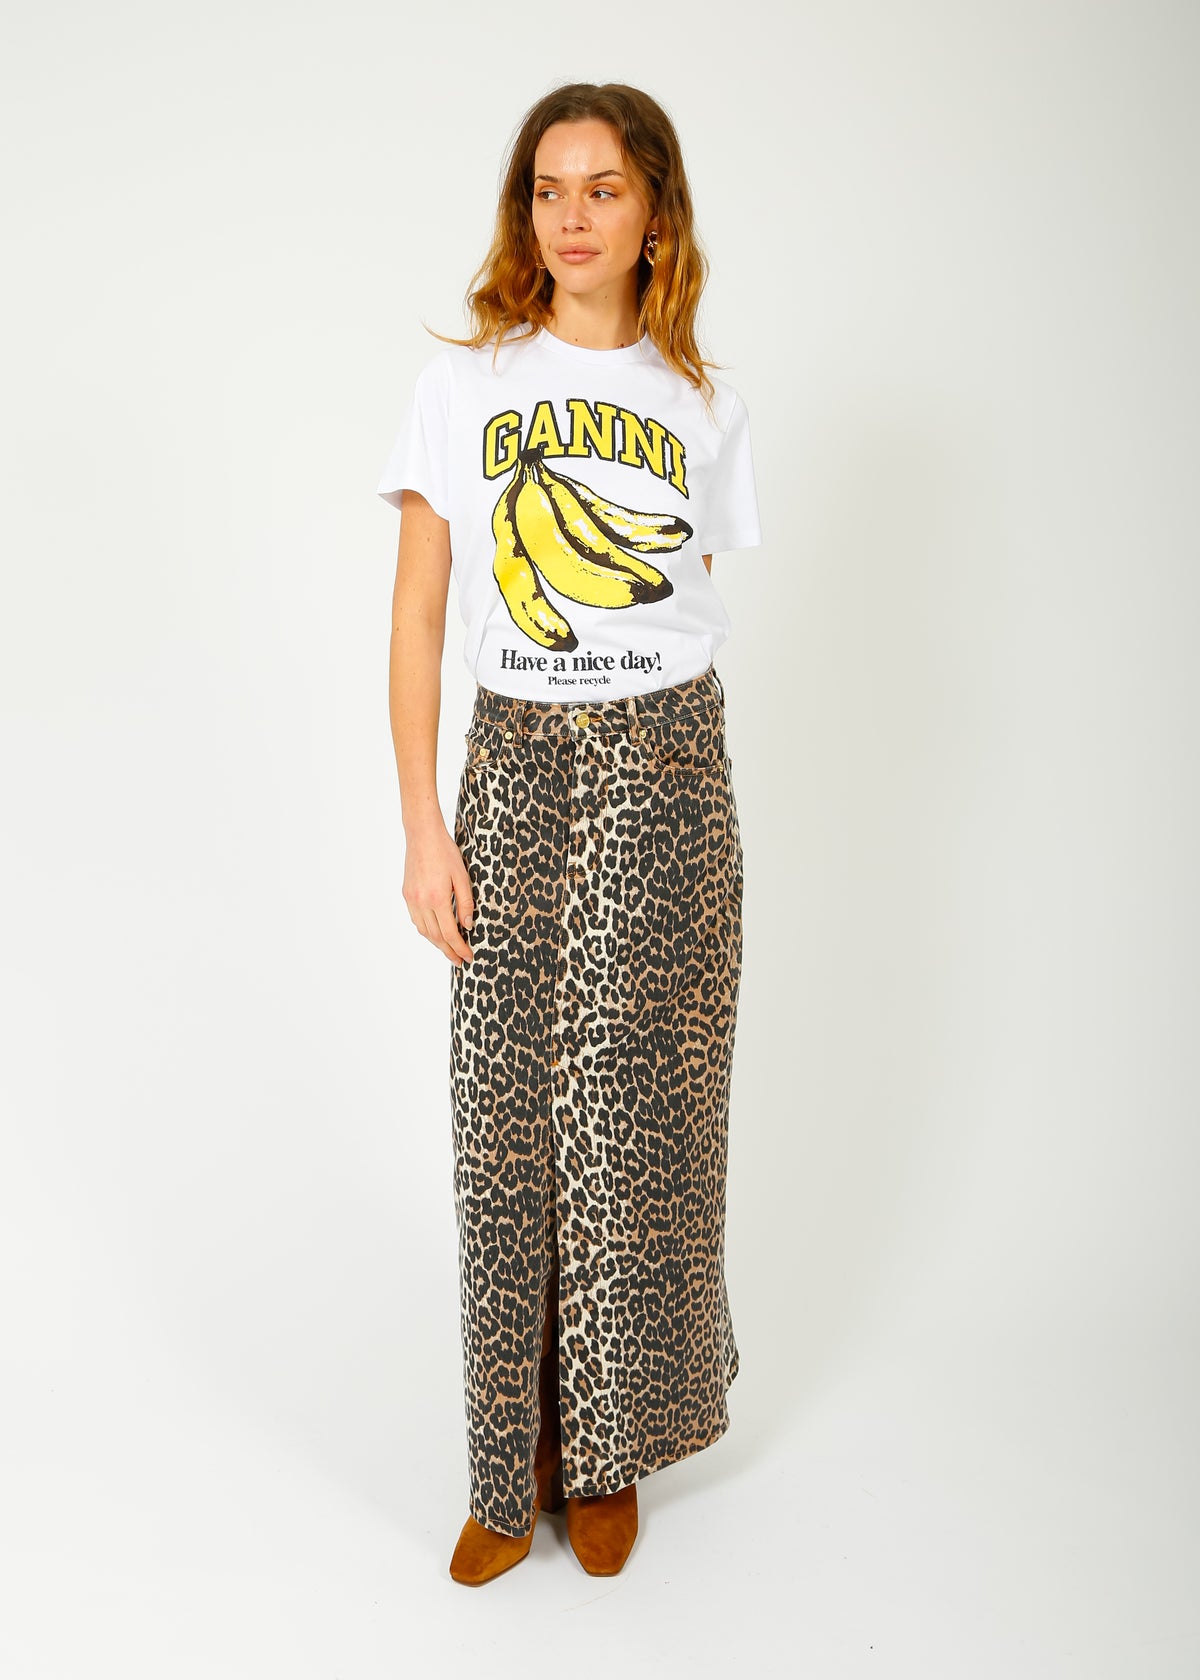 GANNI T3861 Bananas Relaxed Tee in White